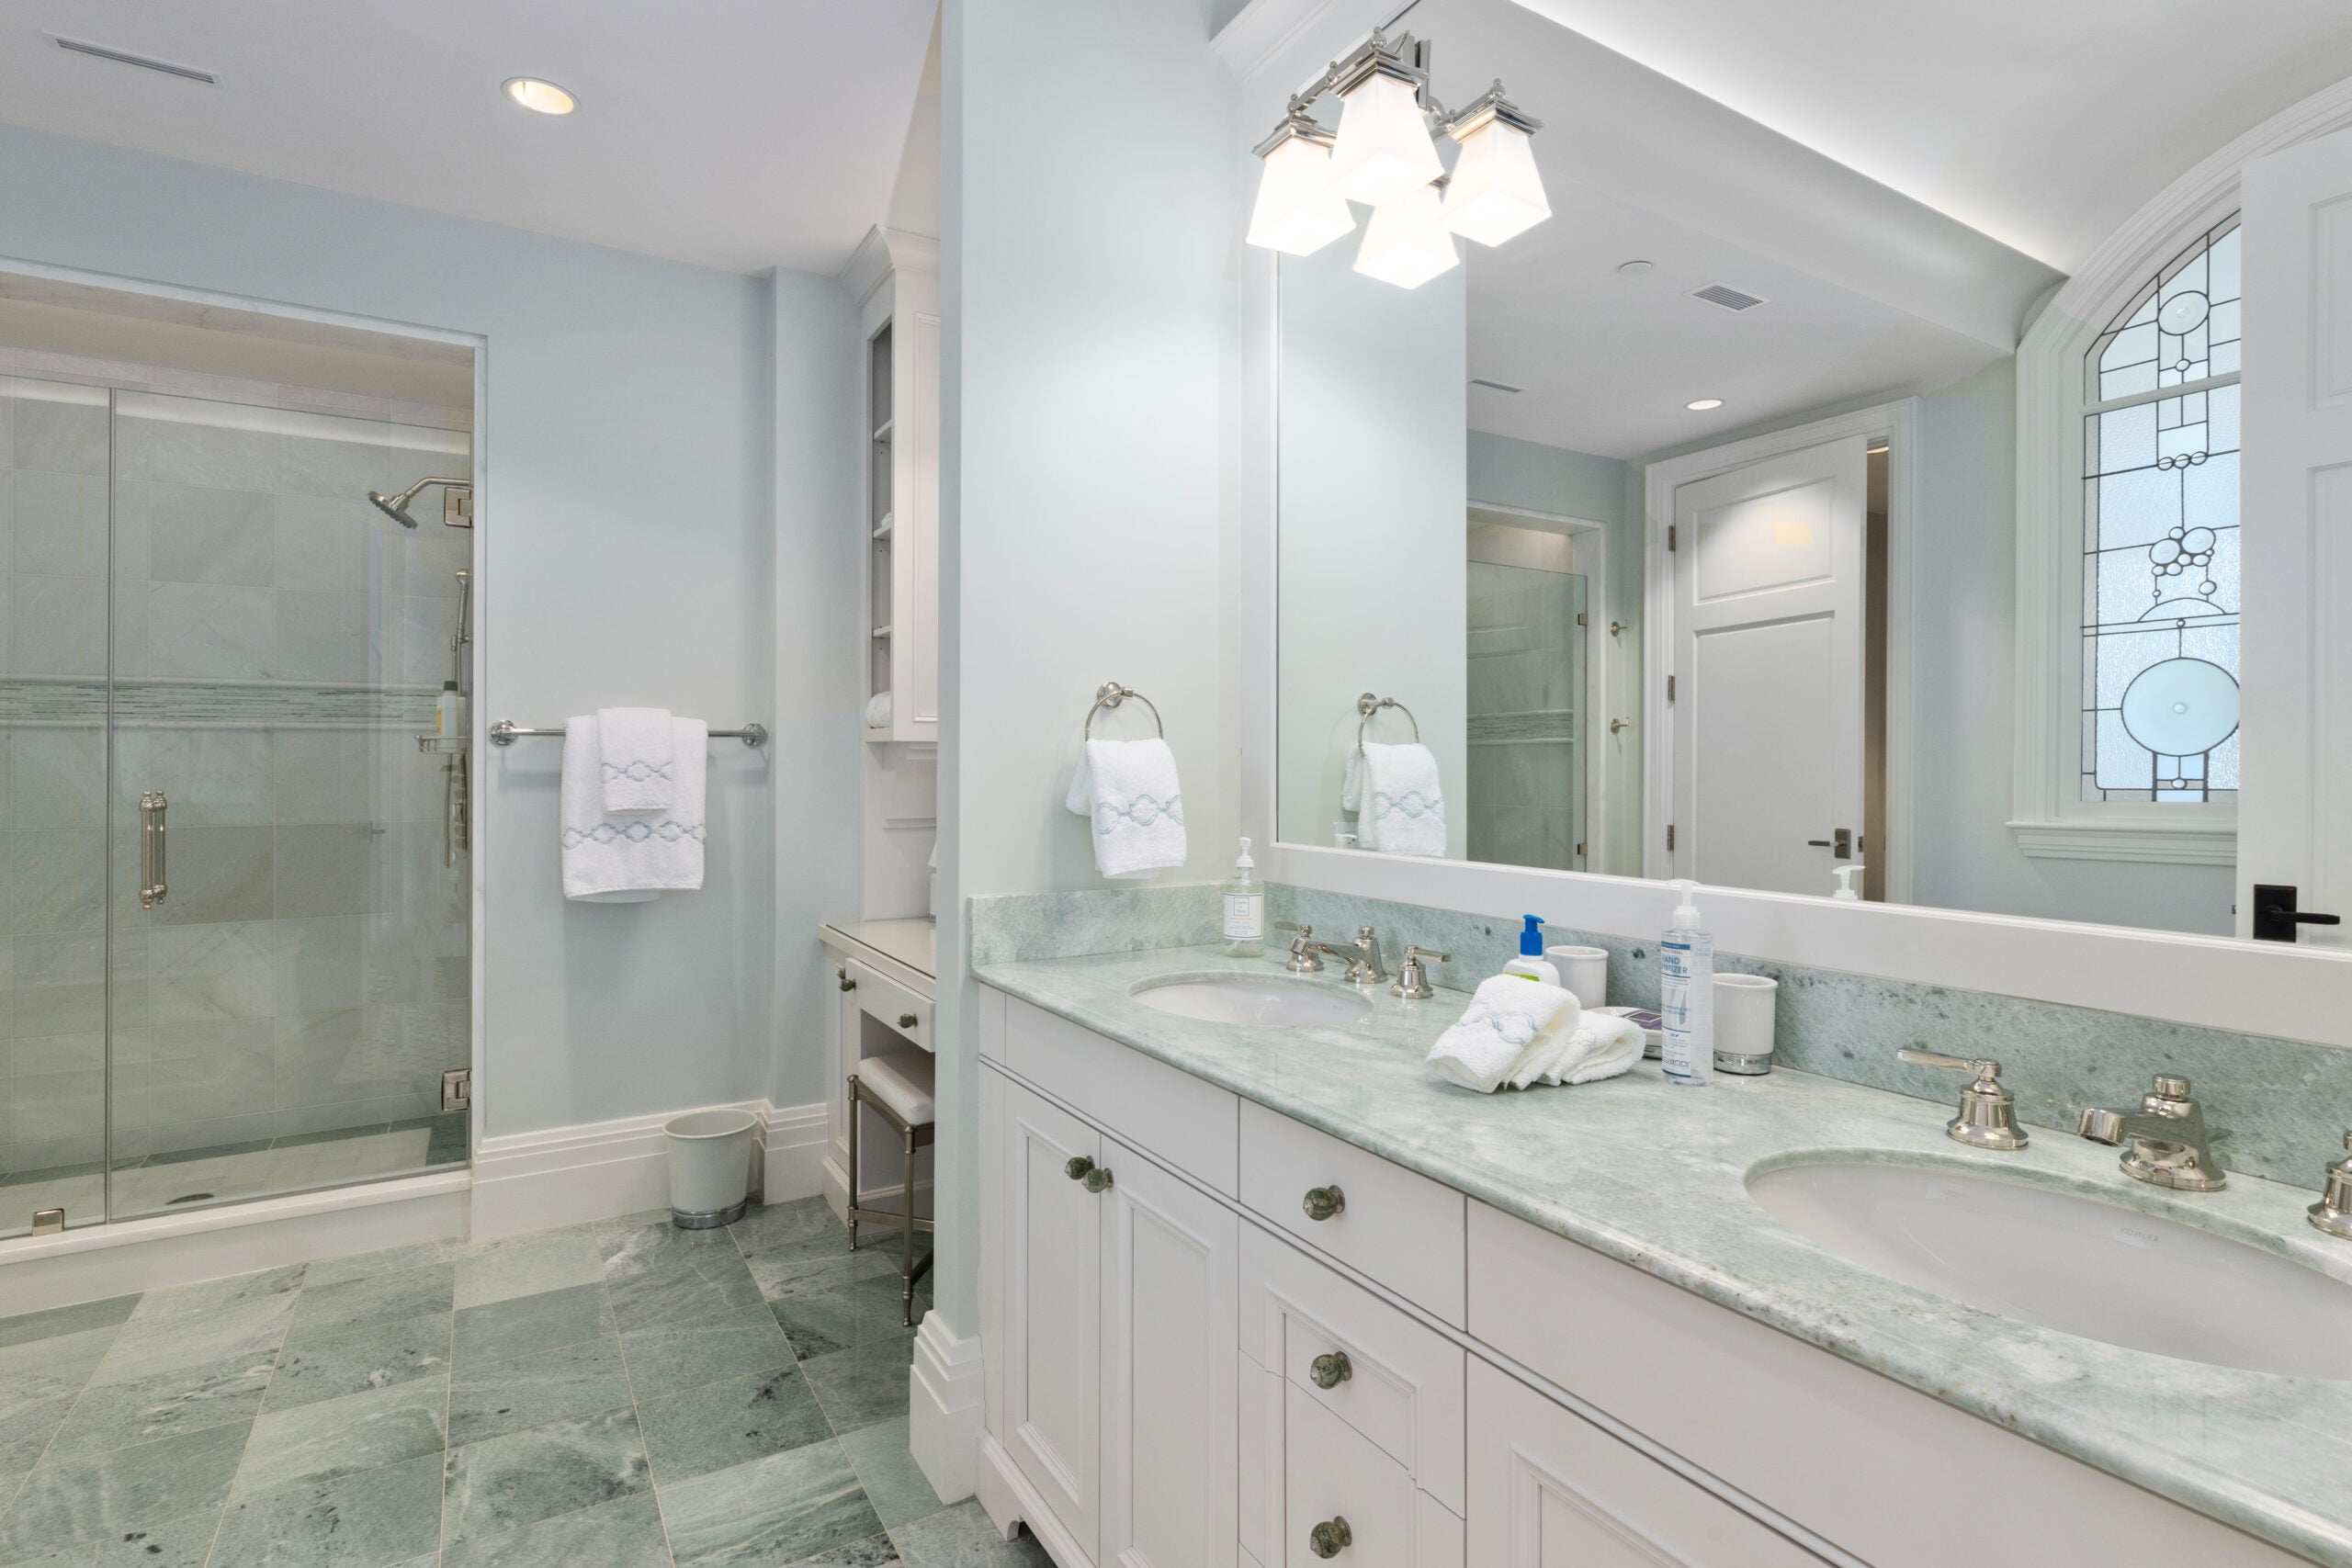 A bathroom with a curbed shower with glass doors, recessed lighting dual sinks, a greenish-gray counter, white cabinetry, a dressing table, and greenish-gray tile. a stained-glass window depicting bubbles is partially visible.